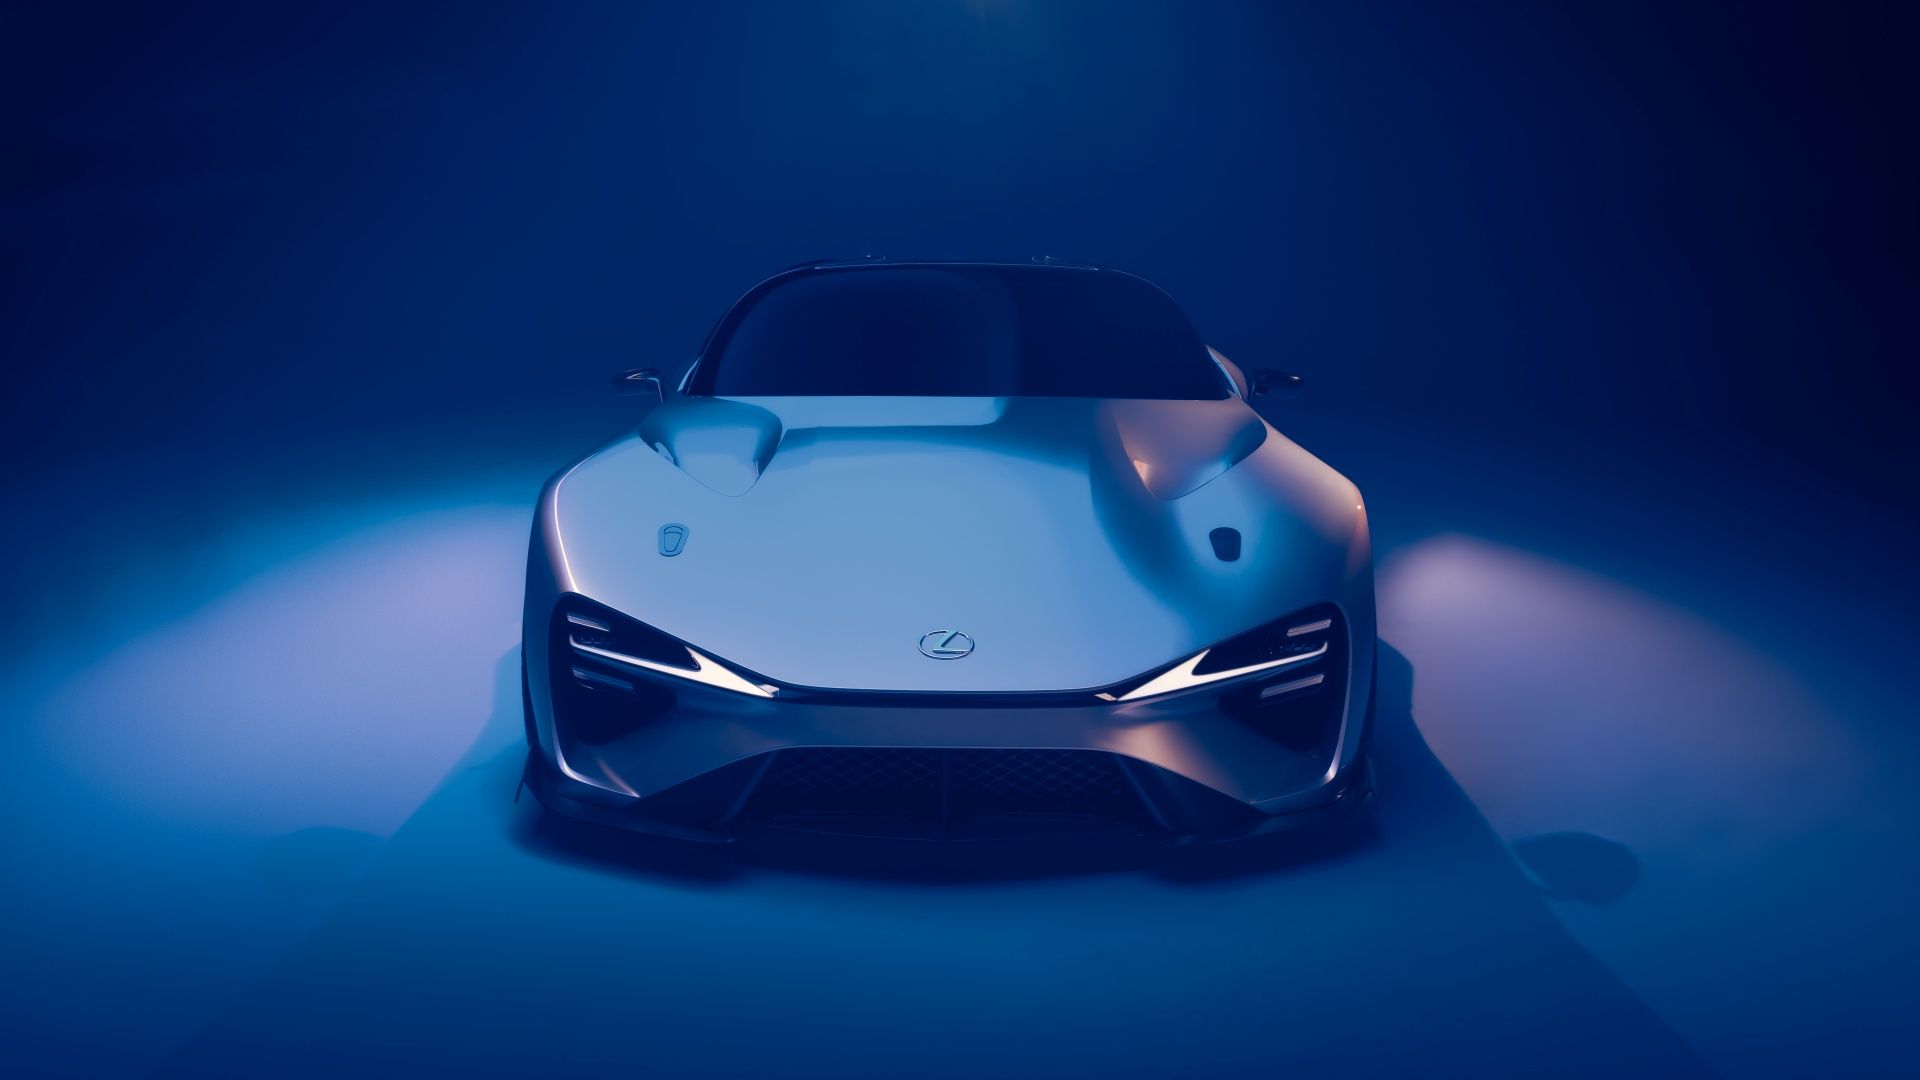 A front studio view of the BEV successor to the LFA